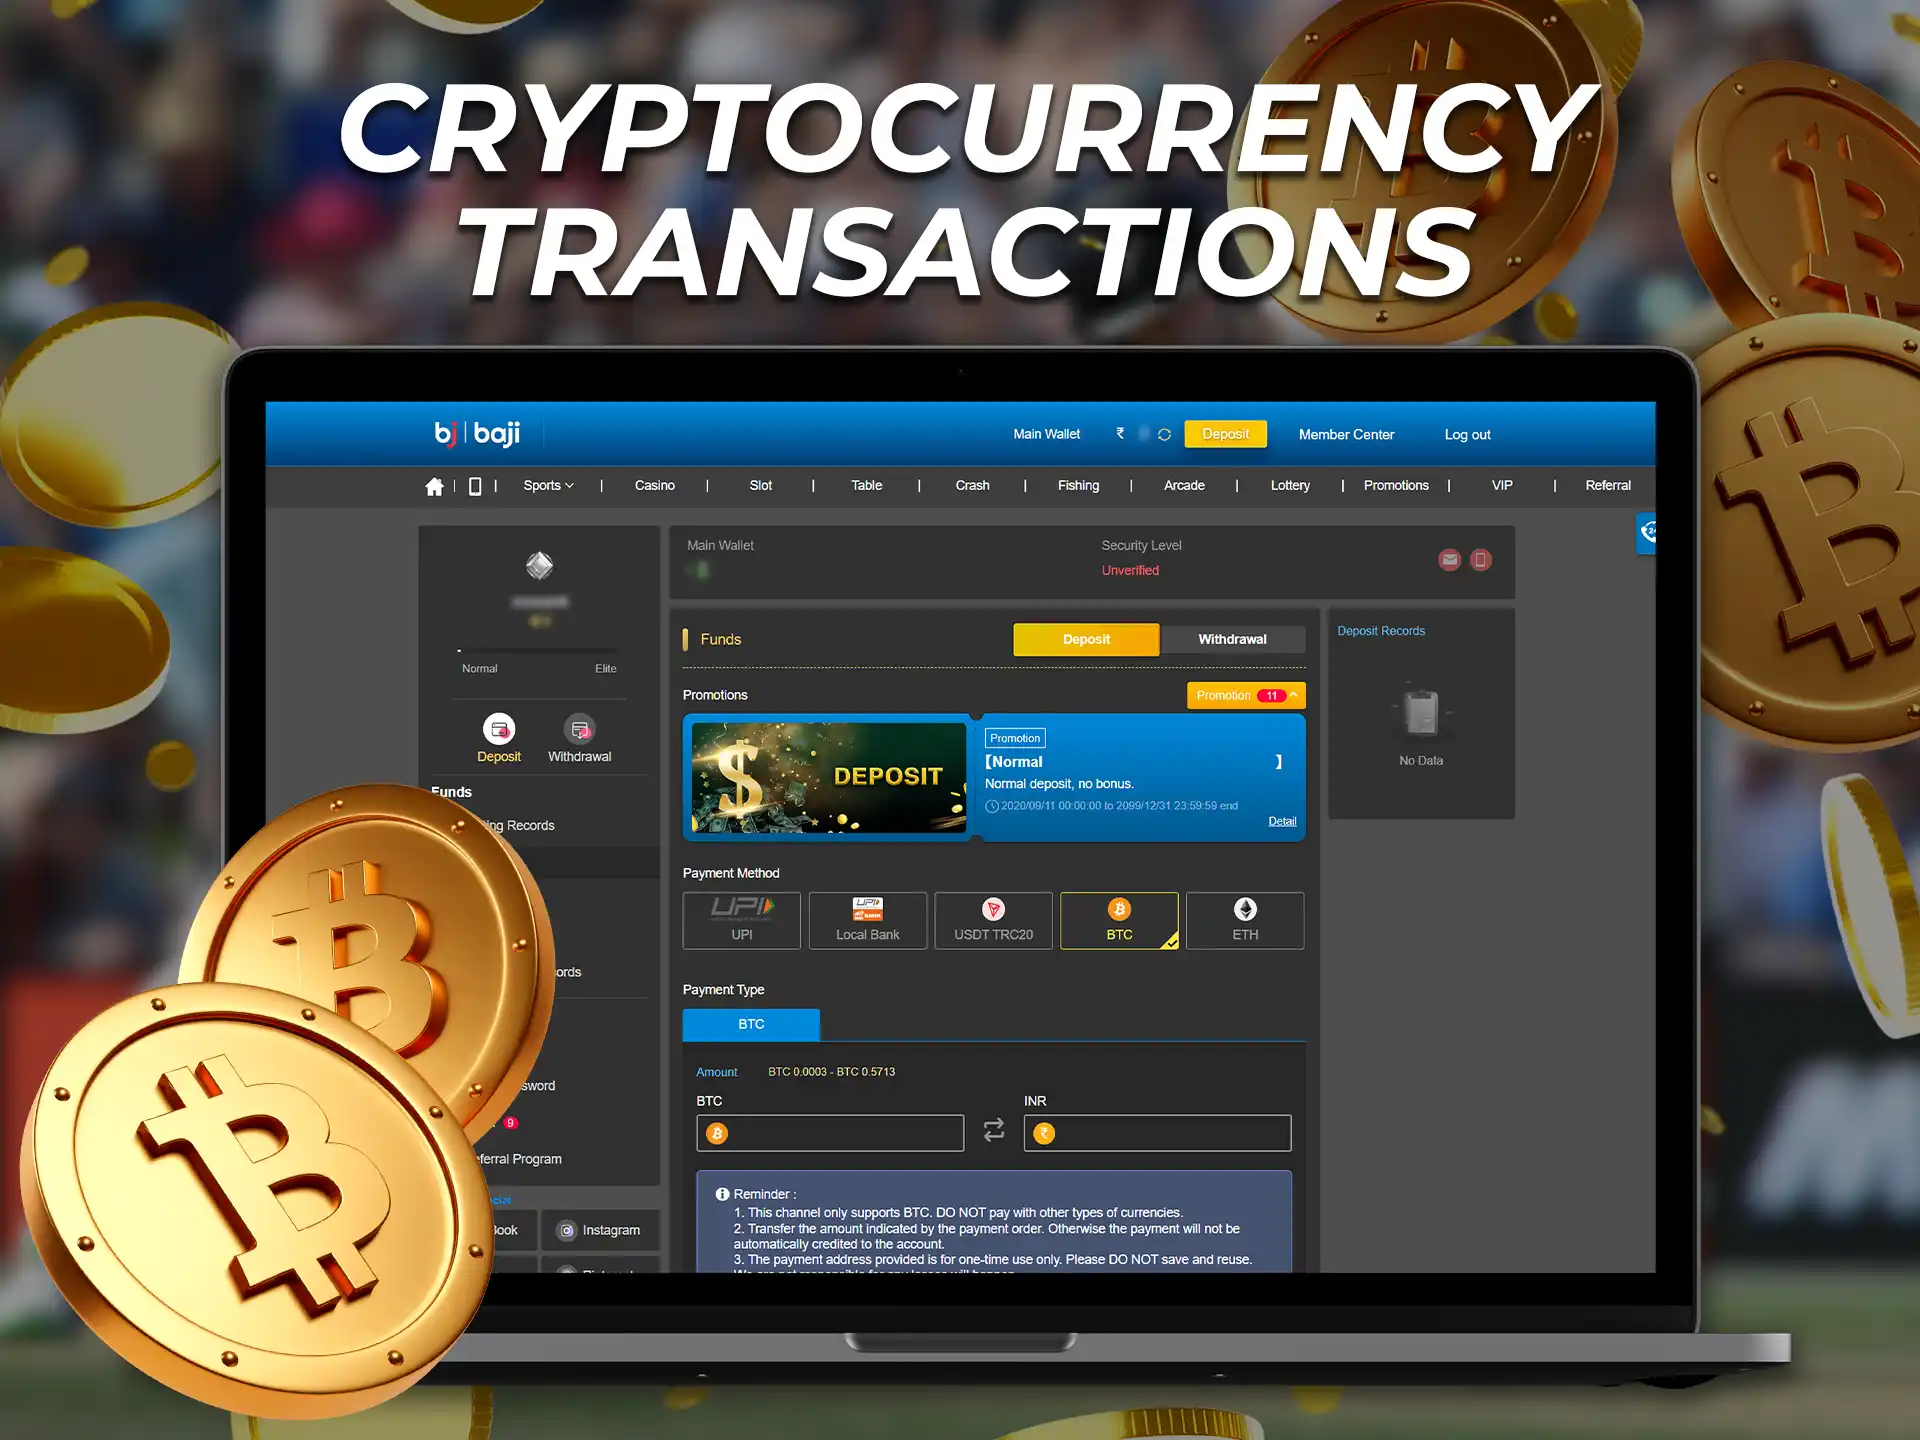 Cryptocurrency transactions are faster and don't reveal sensitive personal information.